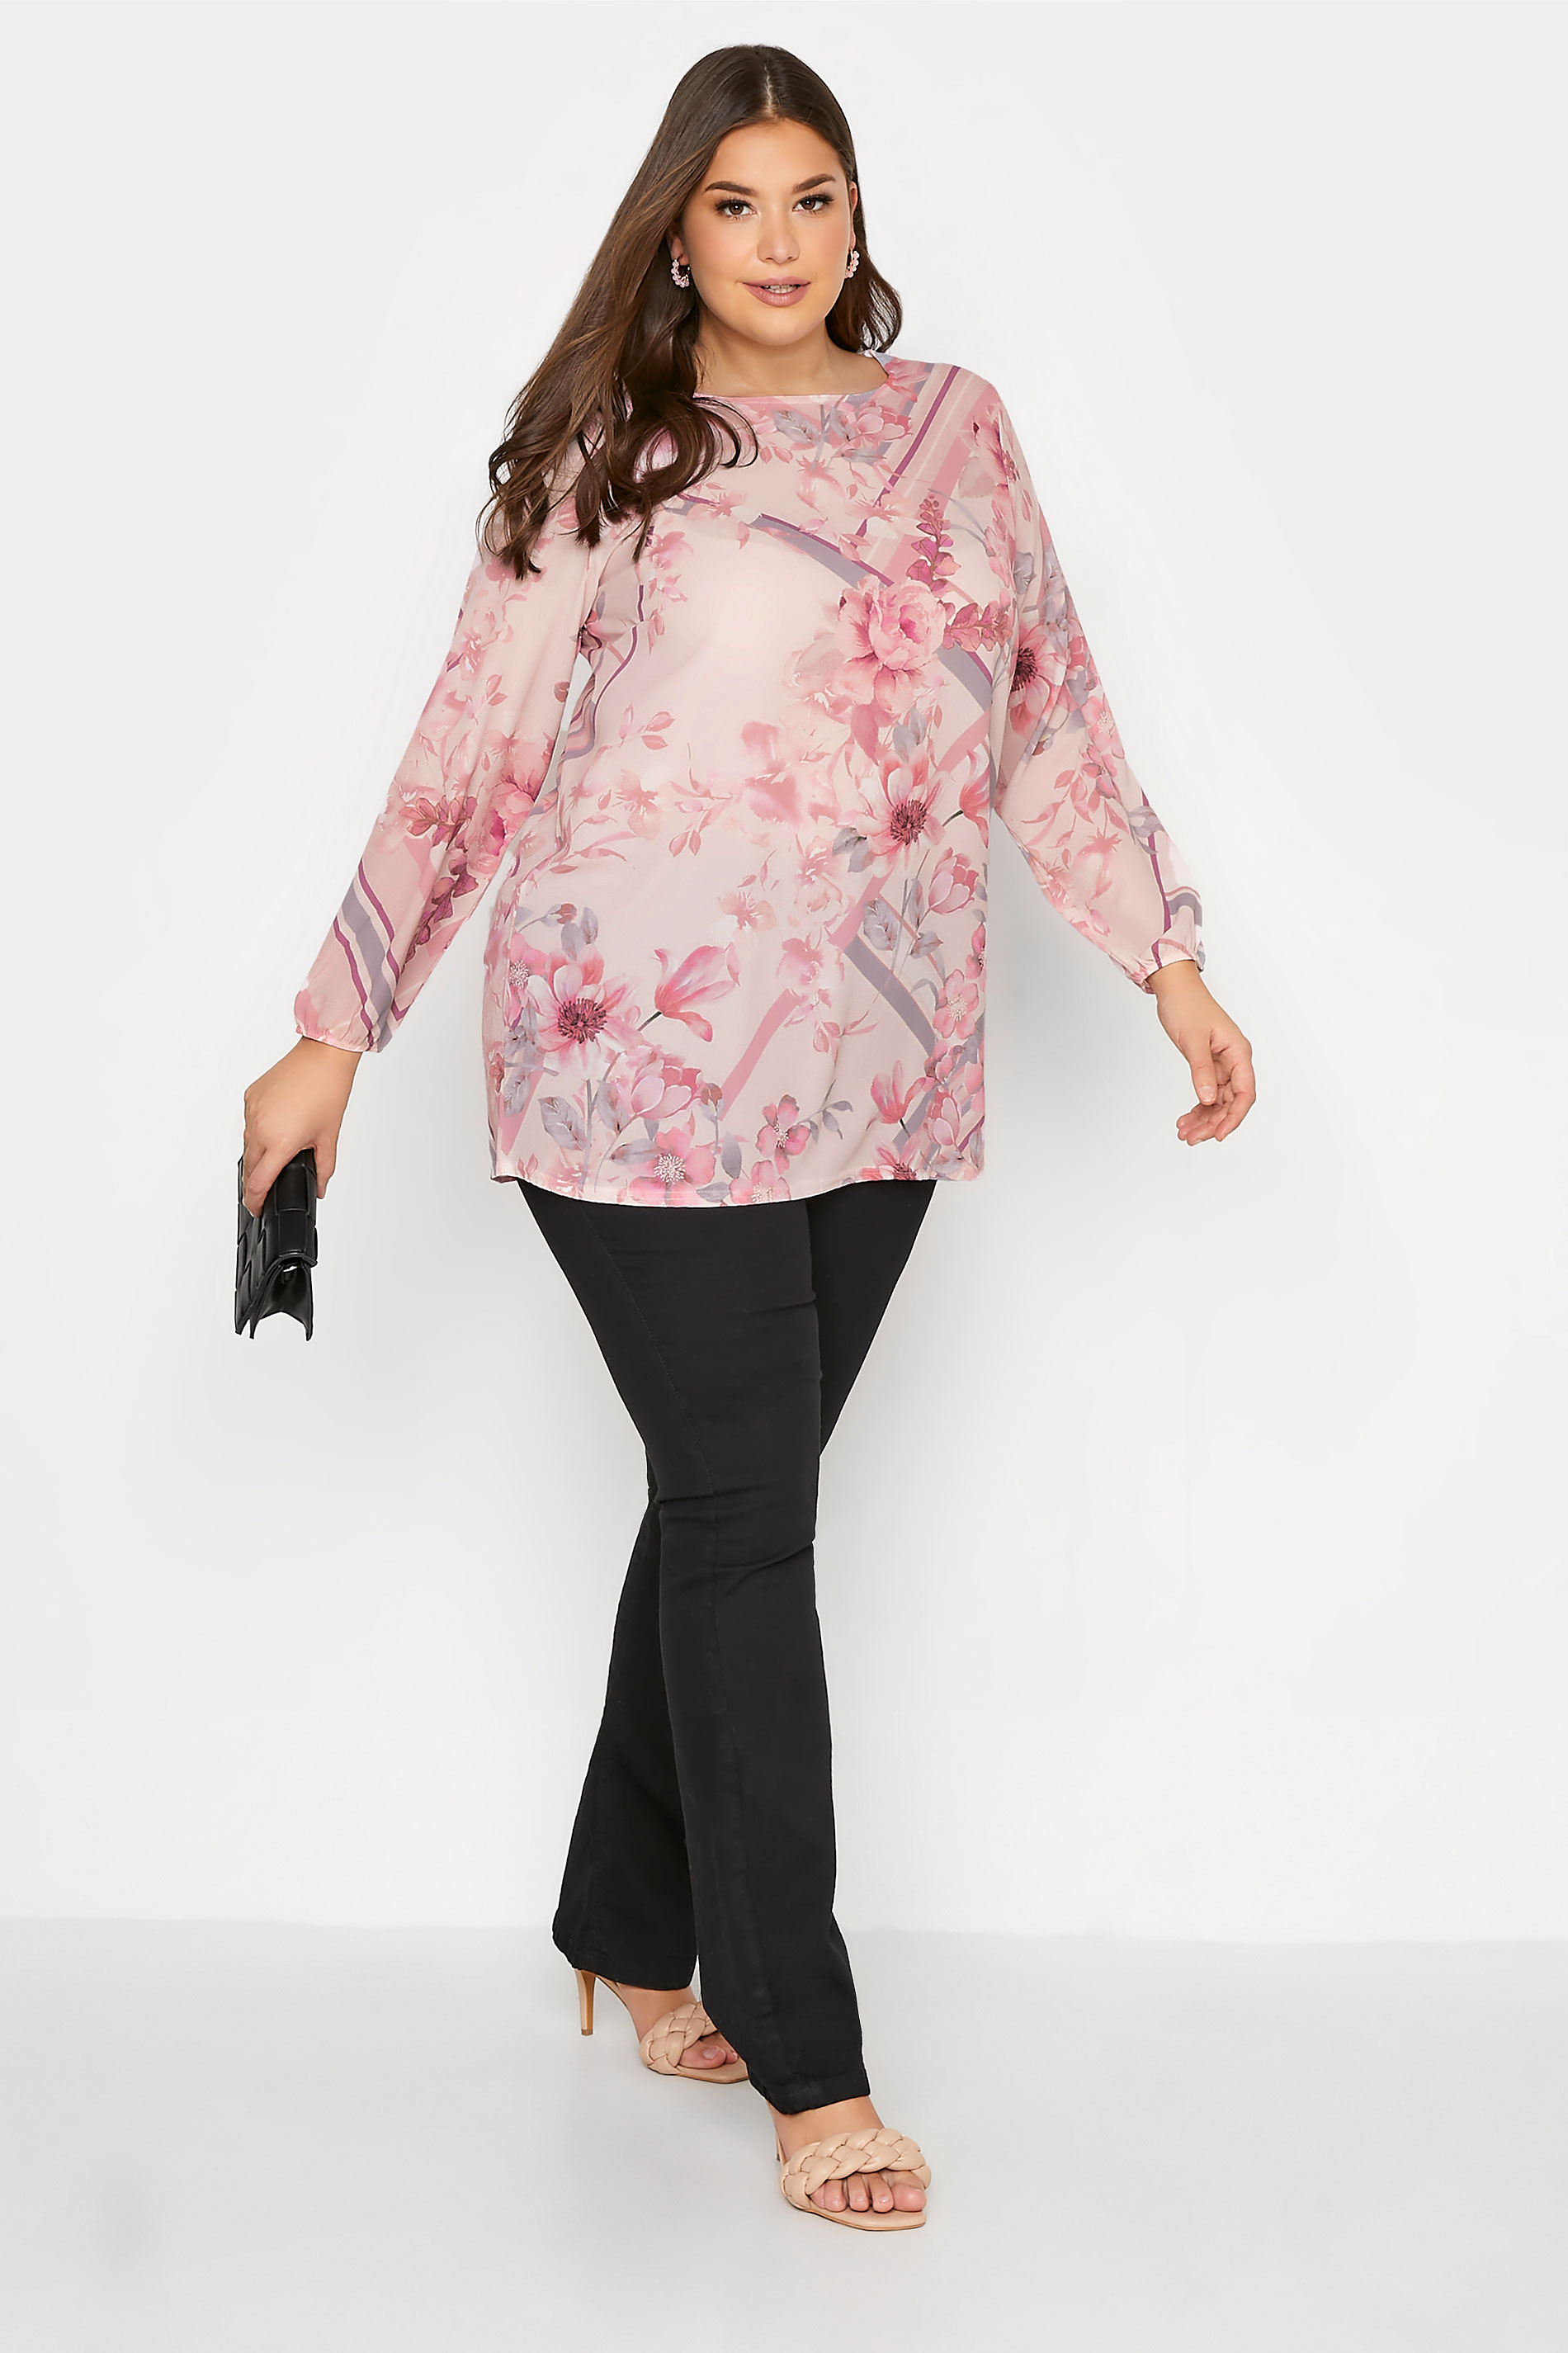 Grande taille  Blouses & Chemisiers Grande taille  Blouses | YOURS LONDON - Blouse Rose Floral Style Foulard - VH15489